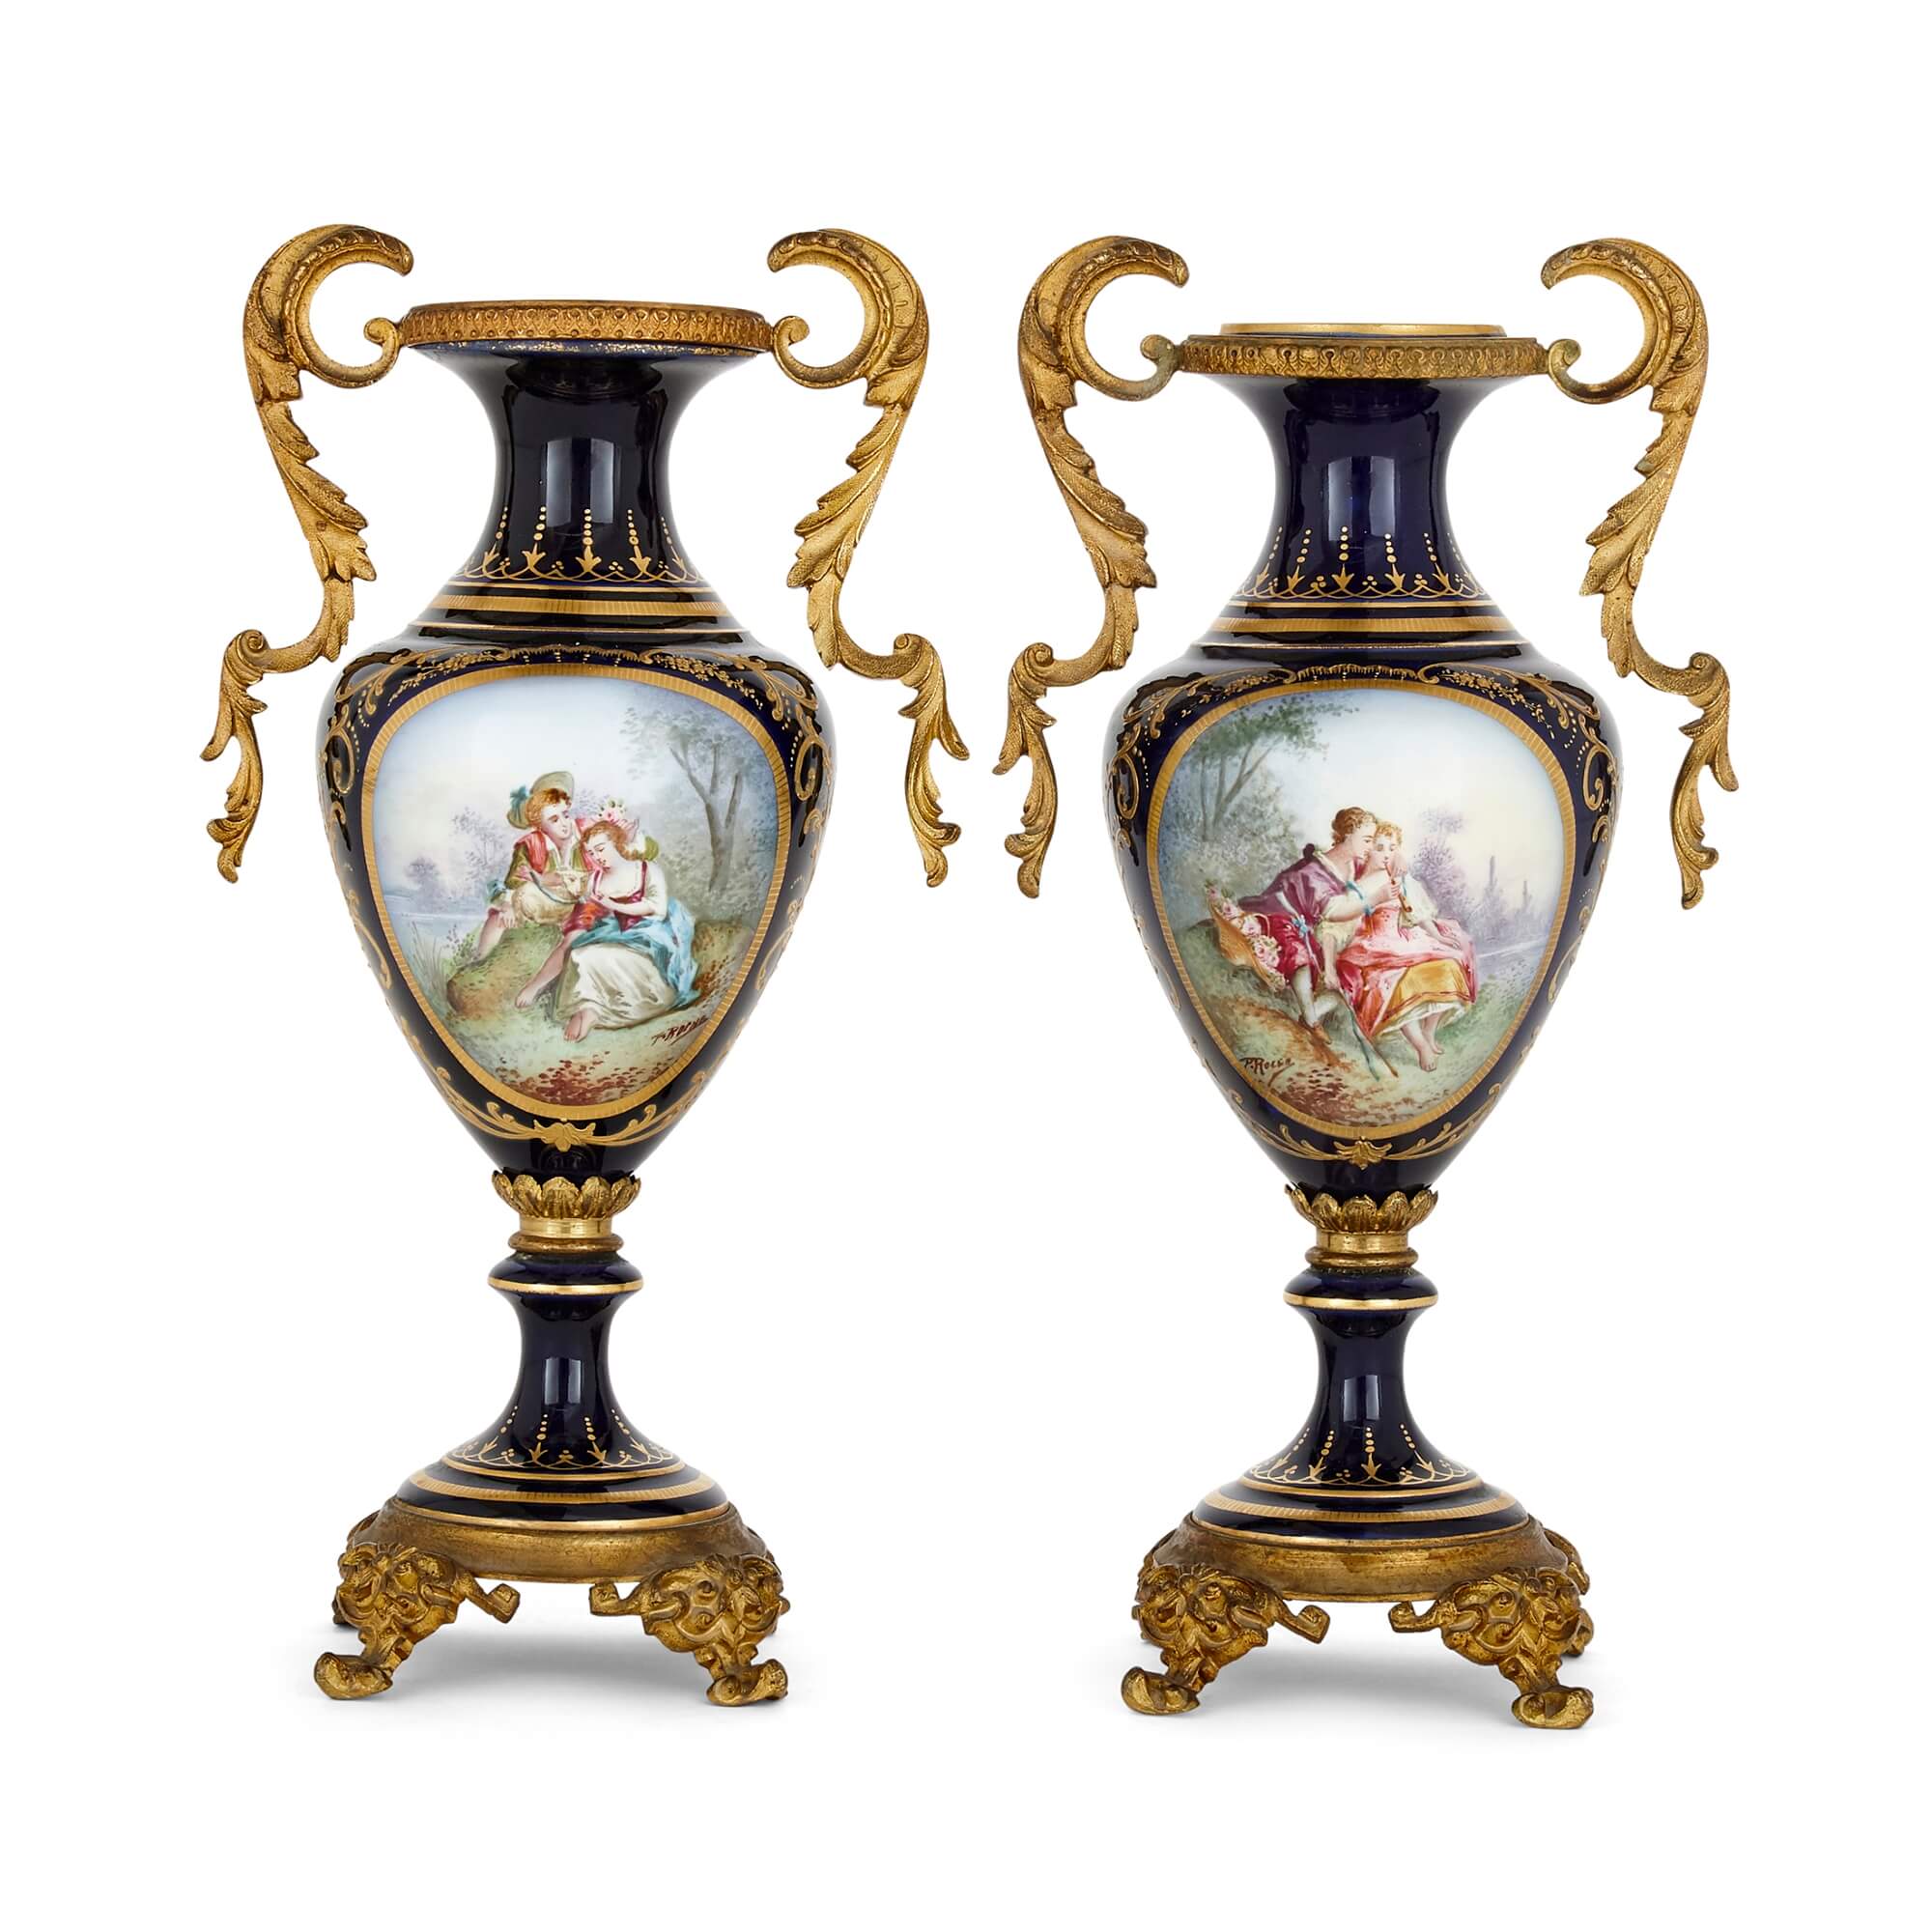 Pair of gilt metal mounted Sèvres style porcelain vases | Mayfair Gallery